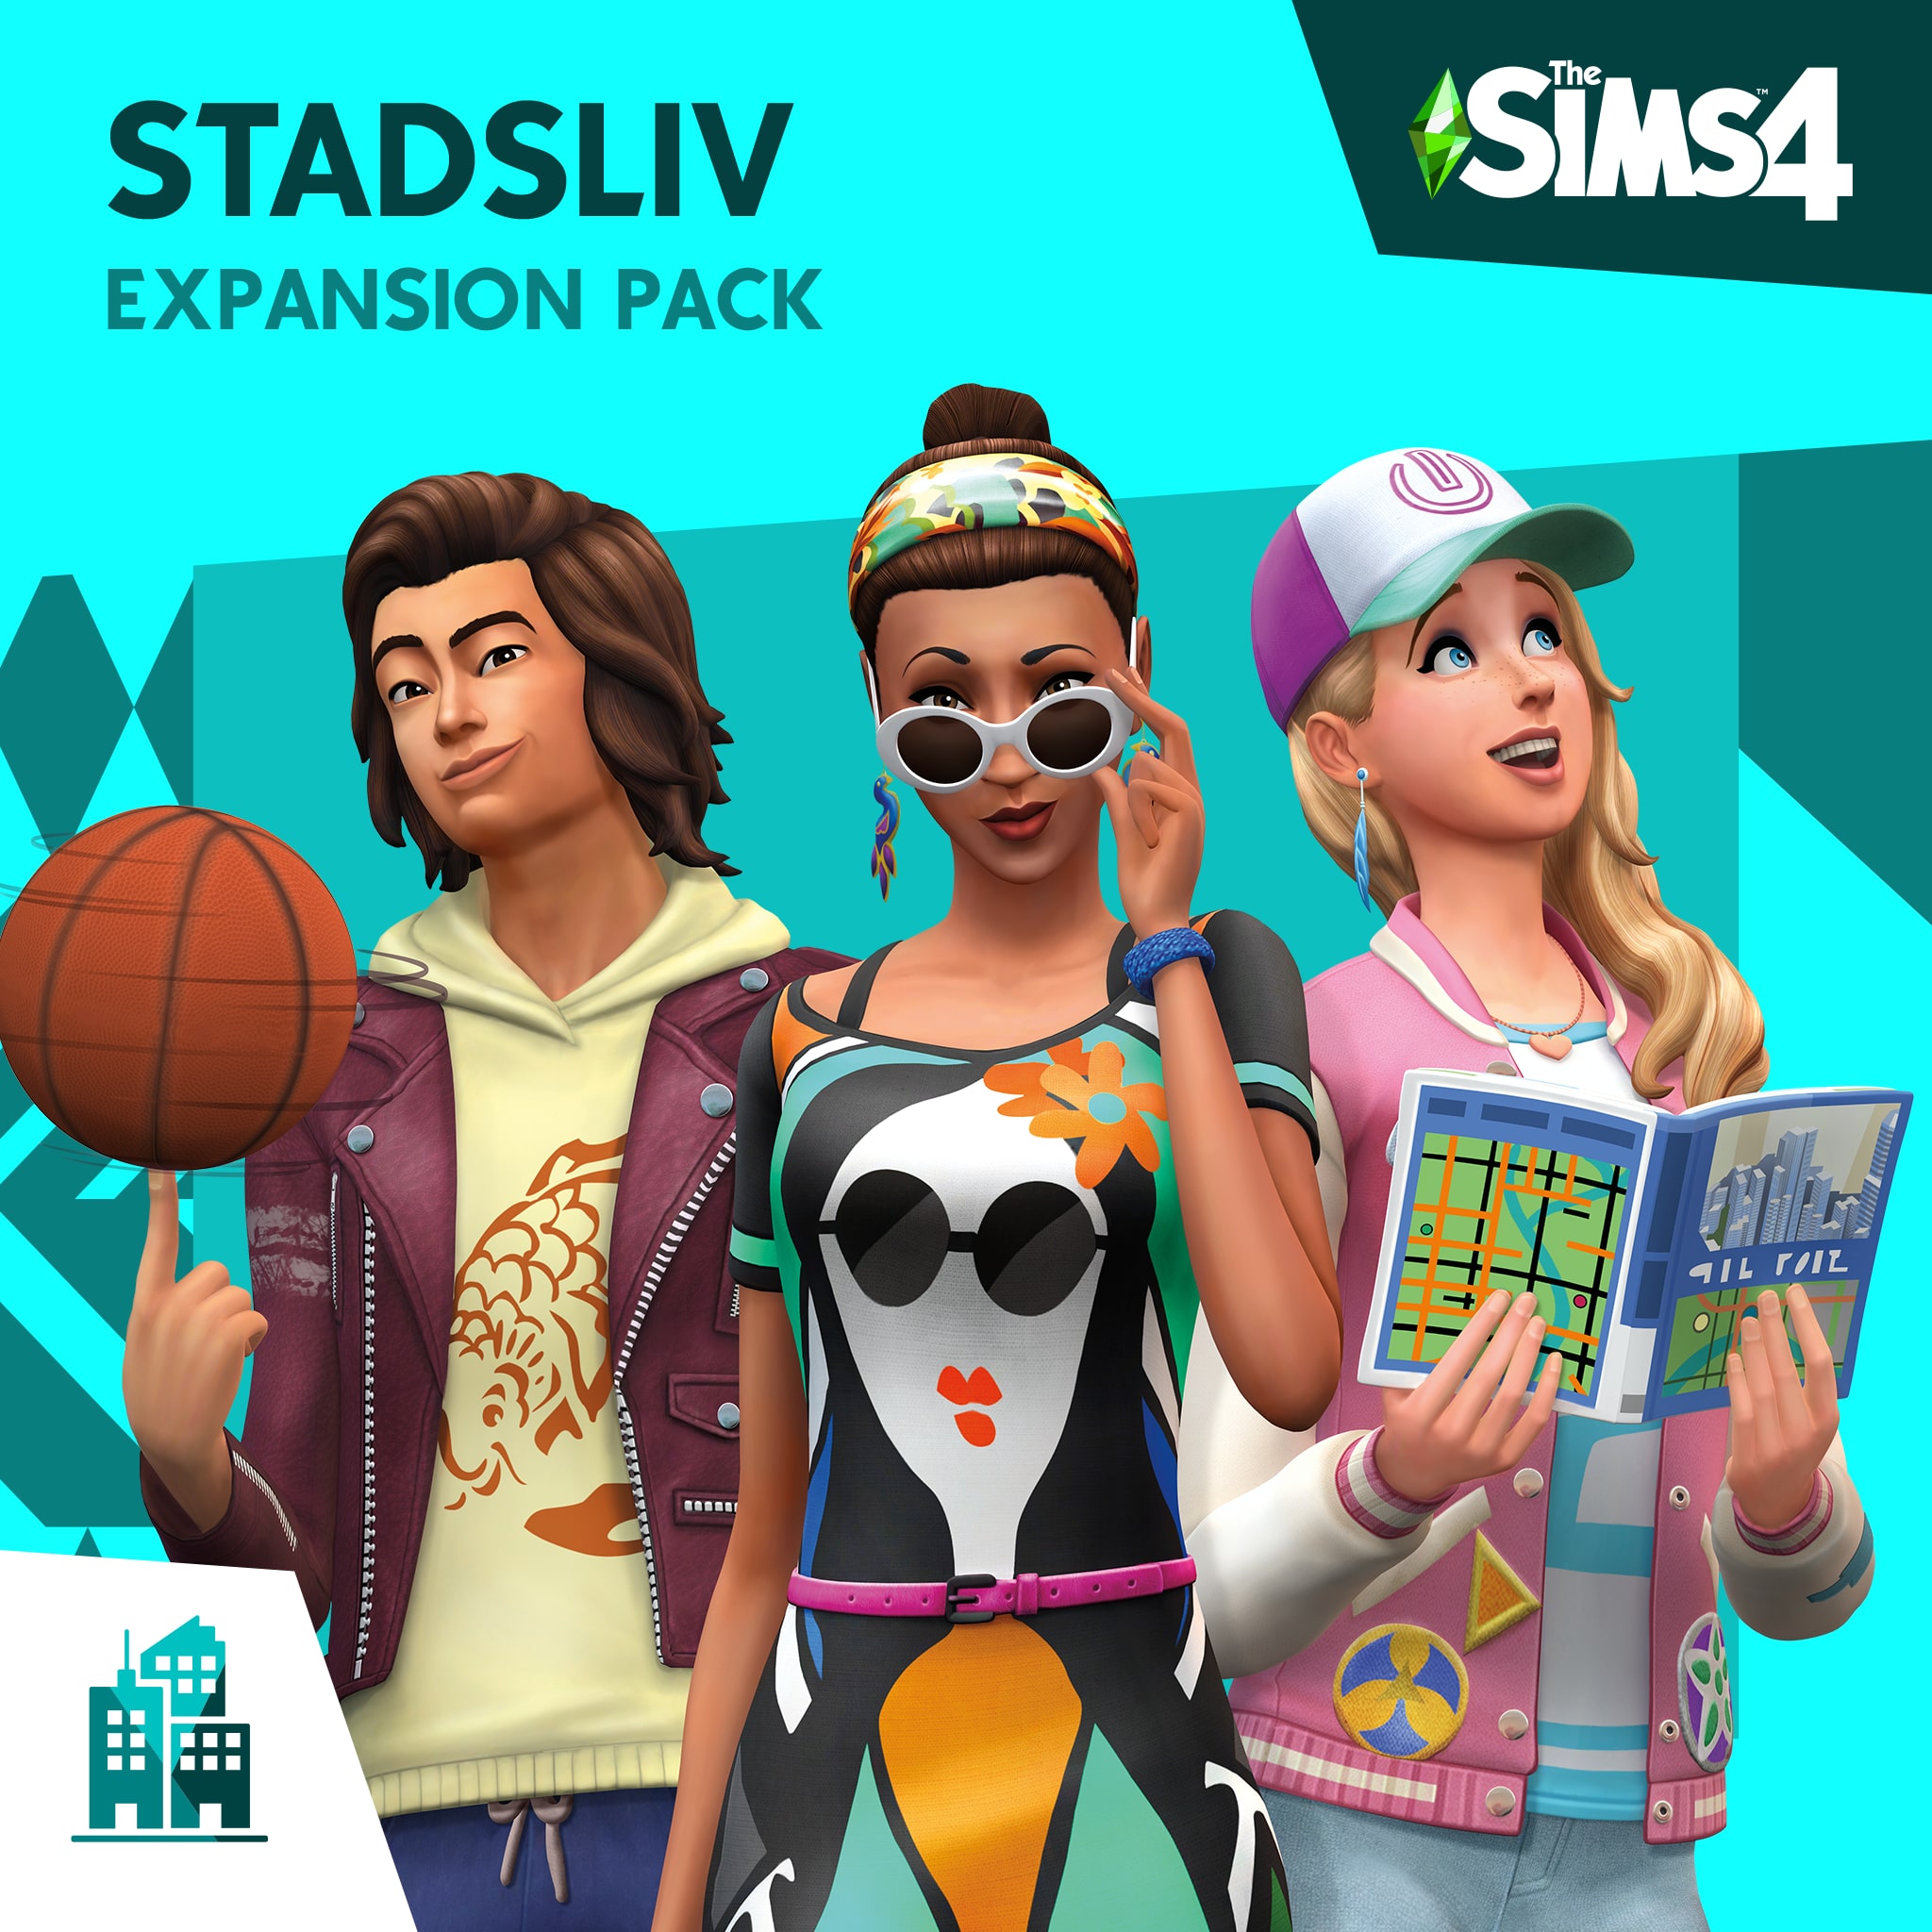 The Sims™ 4 Stadsliv